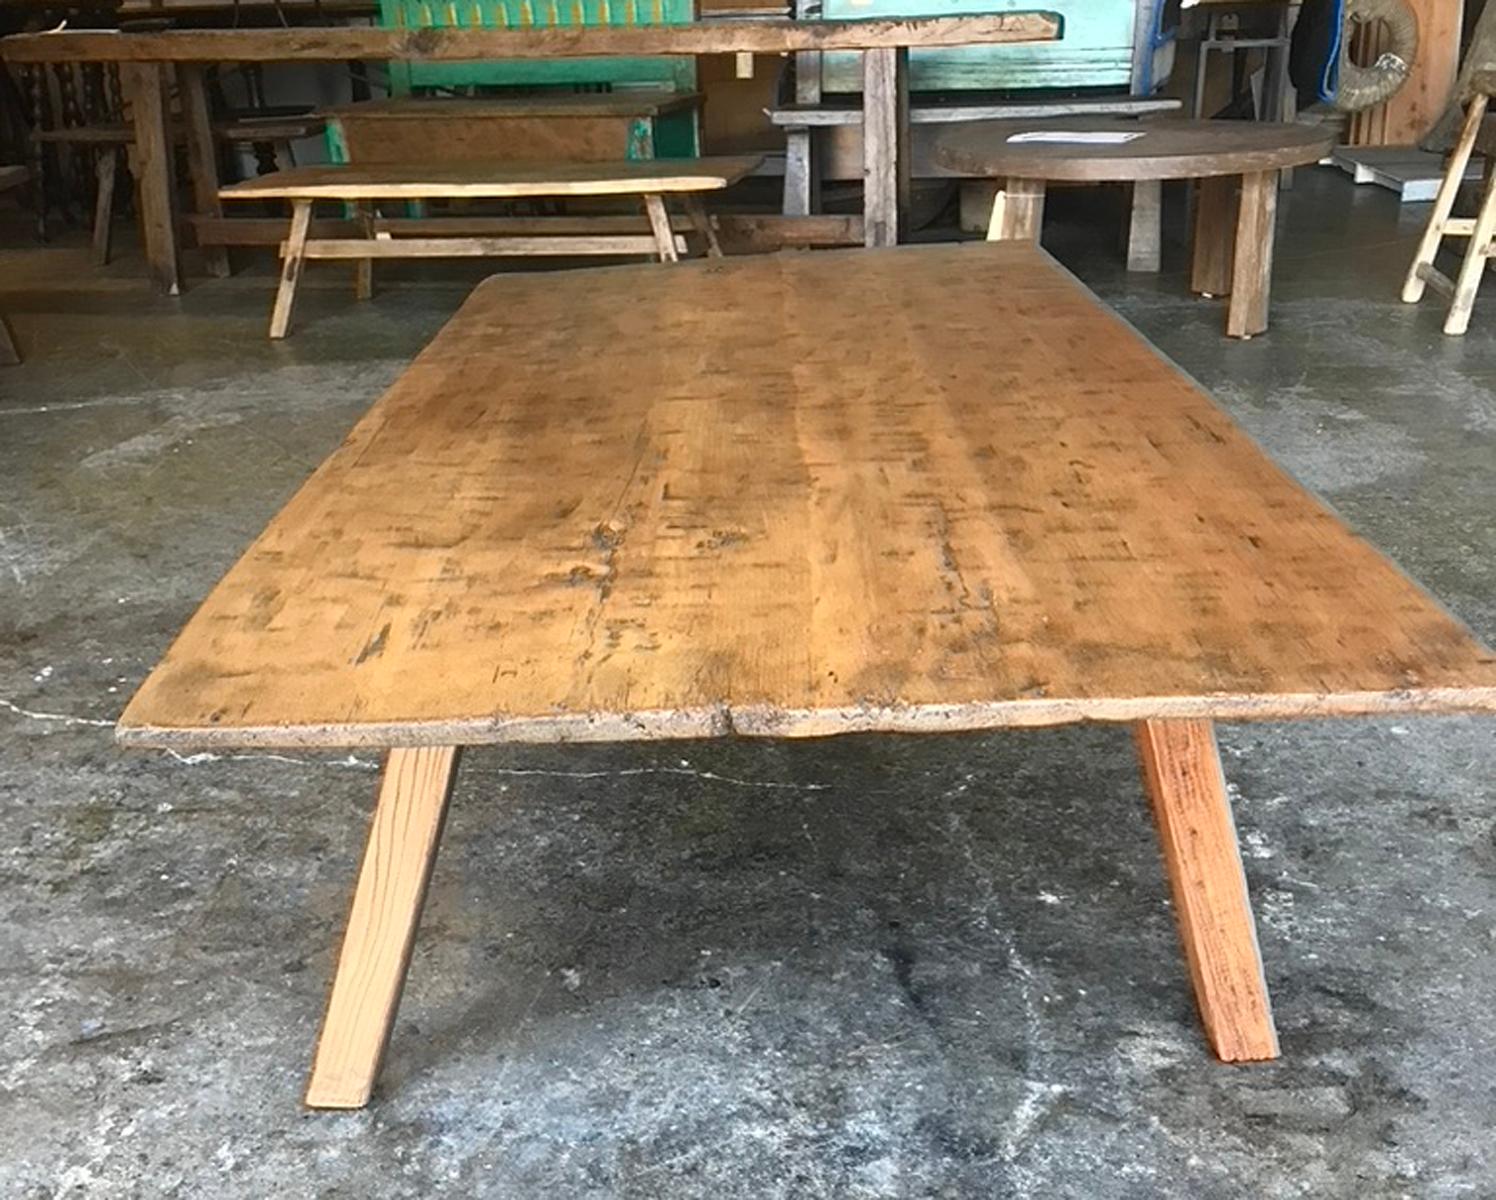 Wood One Wide Board Coffee Table For Sale